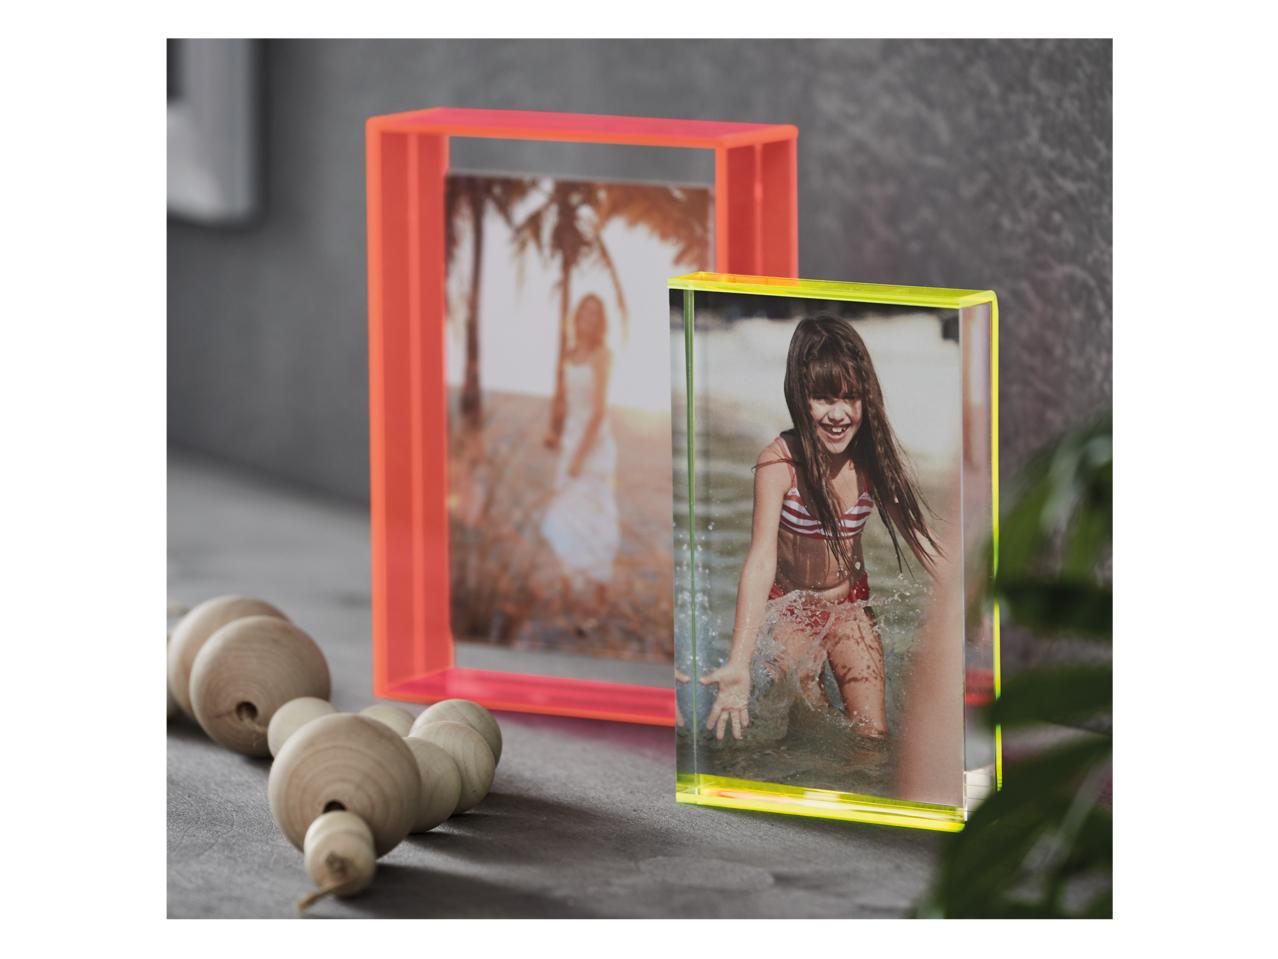 Melinera Acrylic Picture Frames1